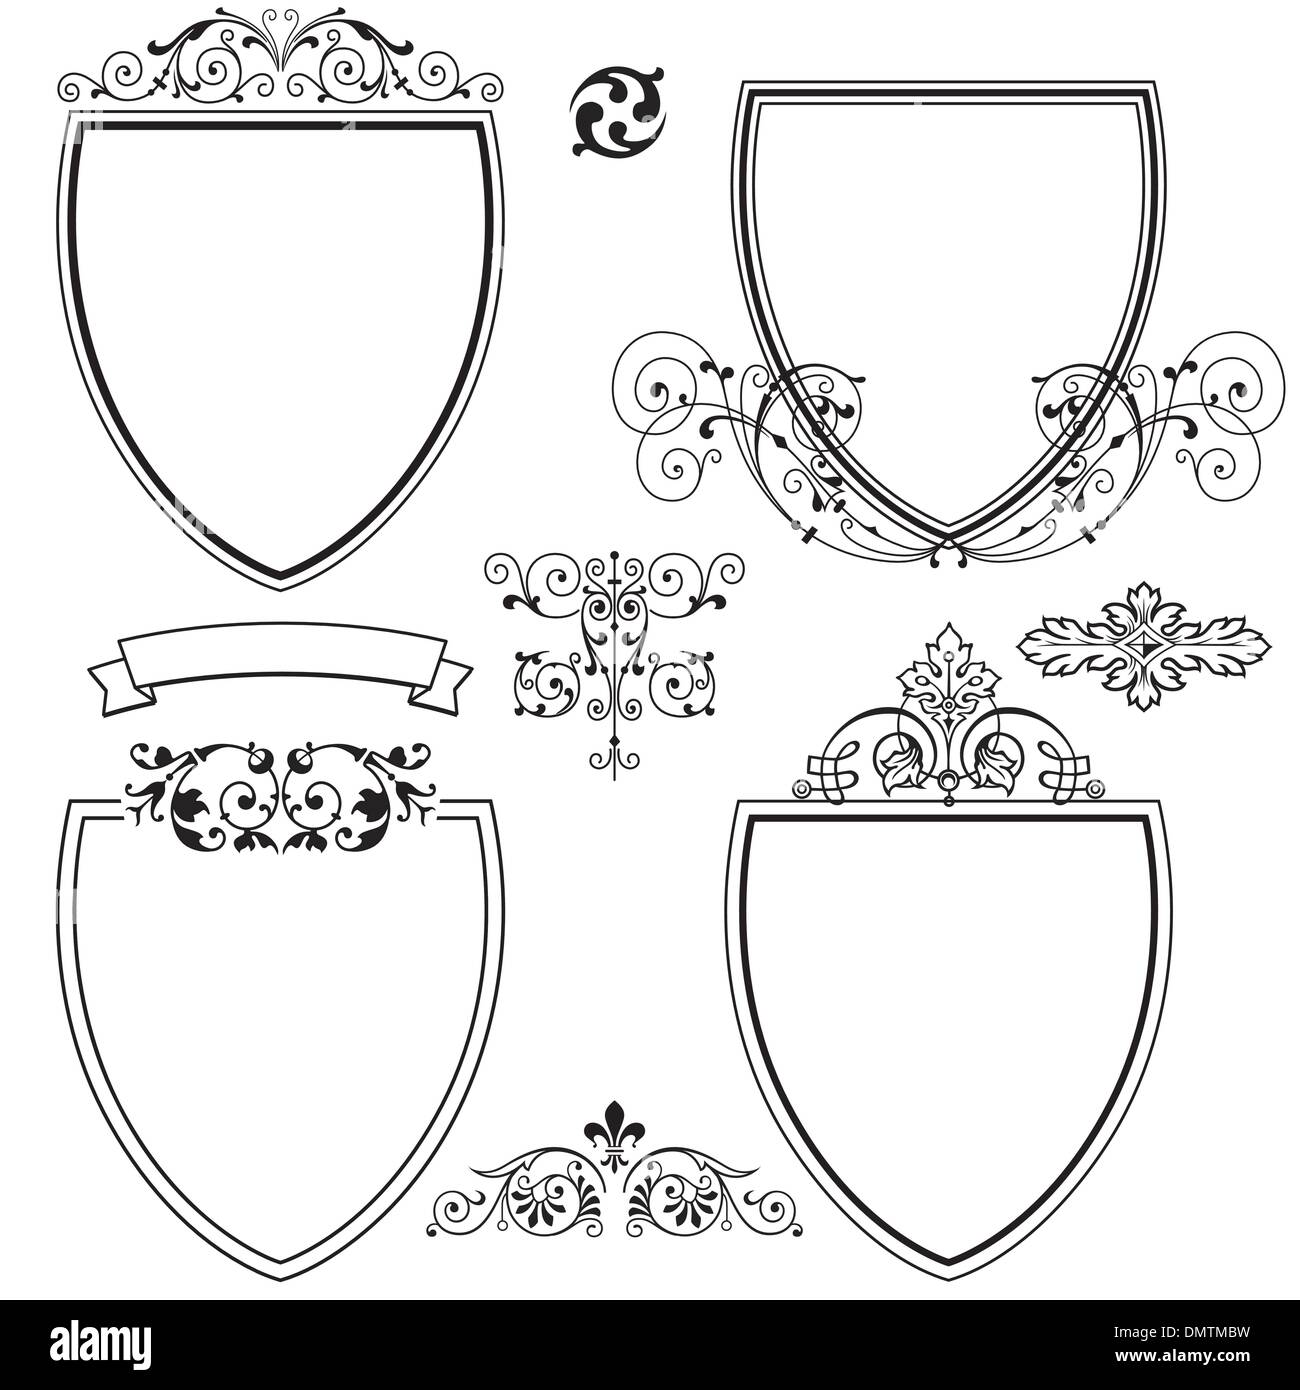 shields and crests Stock Vector